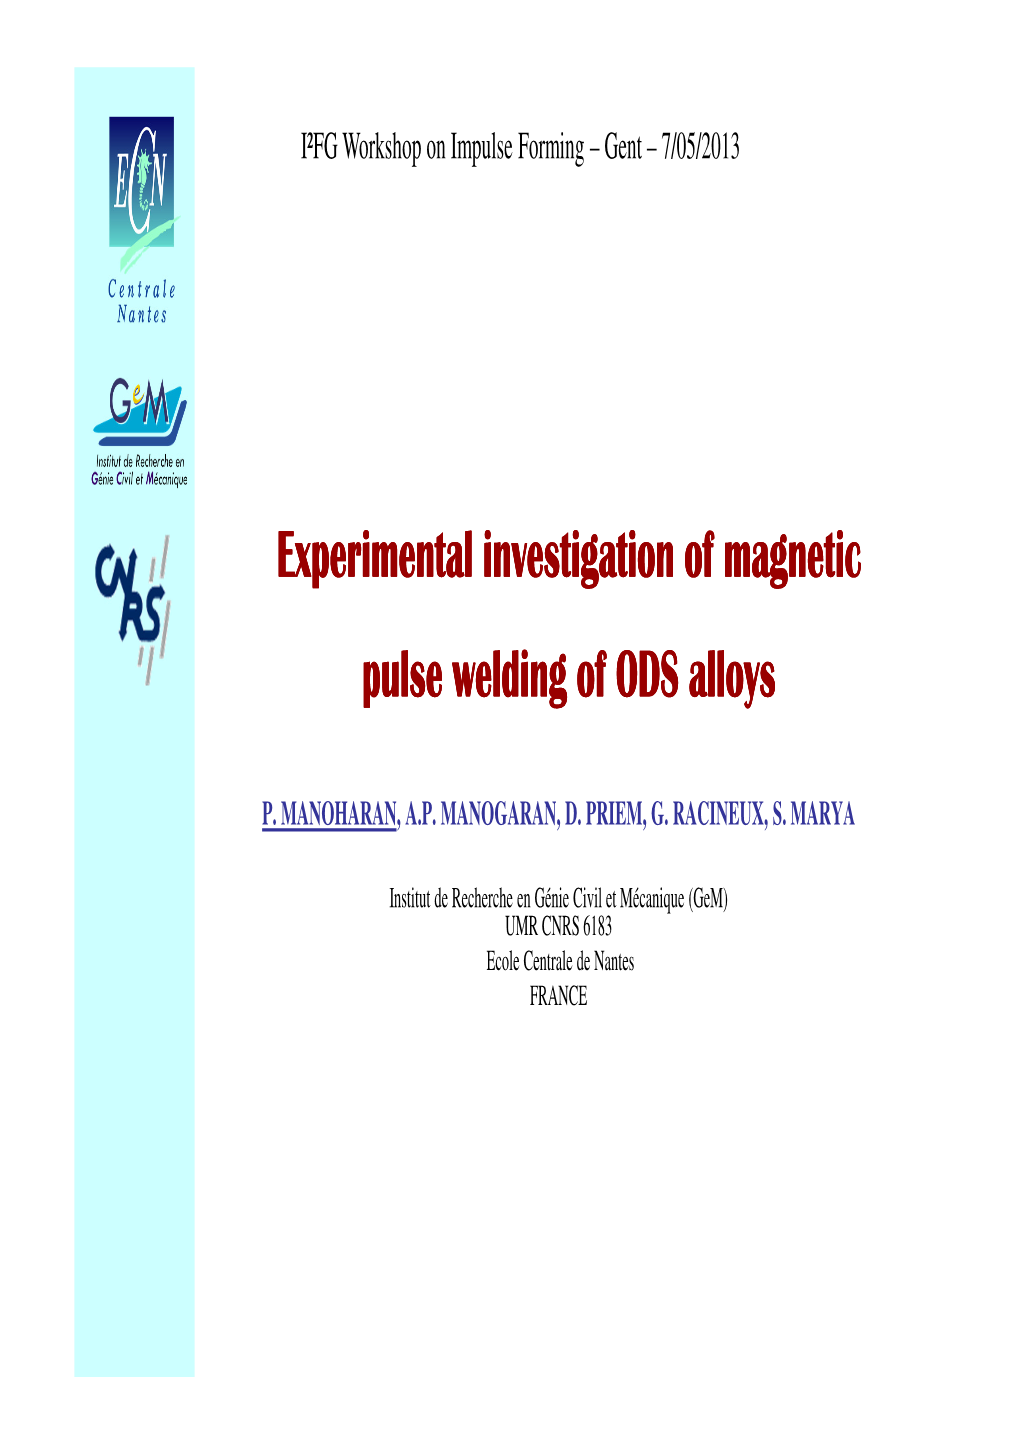 Experimental Investigation of Magnetic Pulse Welding of ODS Alloys